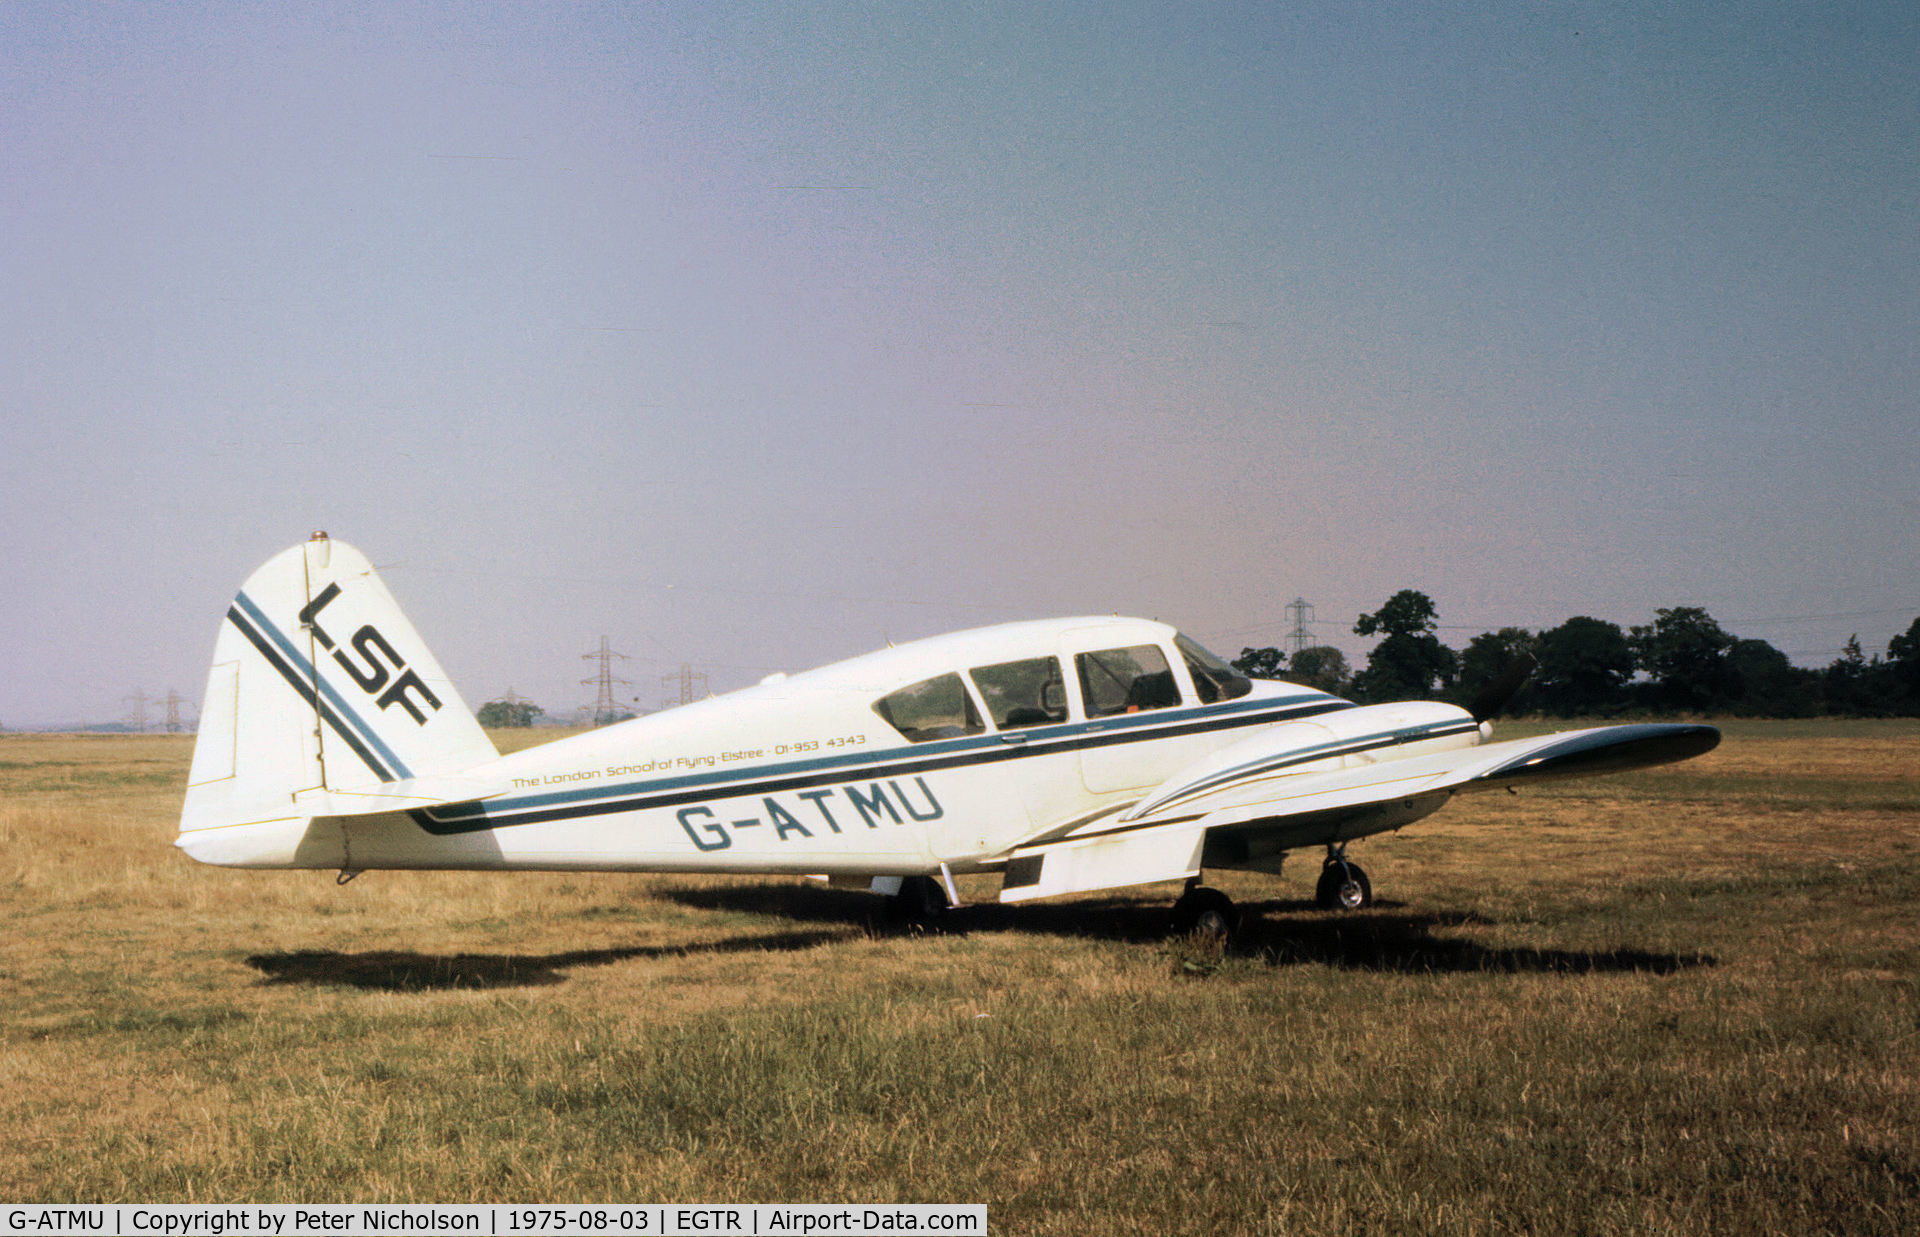 G-ATMU, 1965 Piper PA-23-160 Apache C/N 23-2000, PA-23 Apache of the London School of Flying at Elstree in the Summer of 1975.